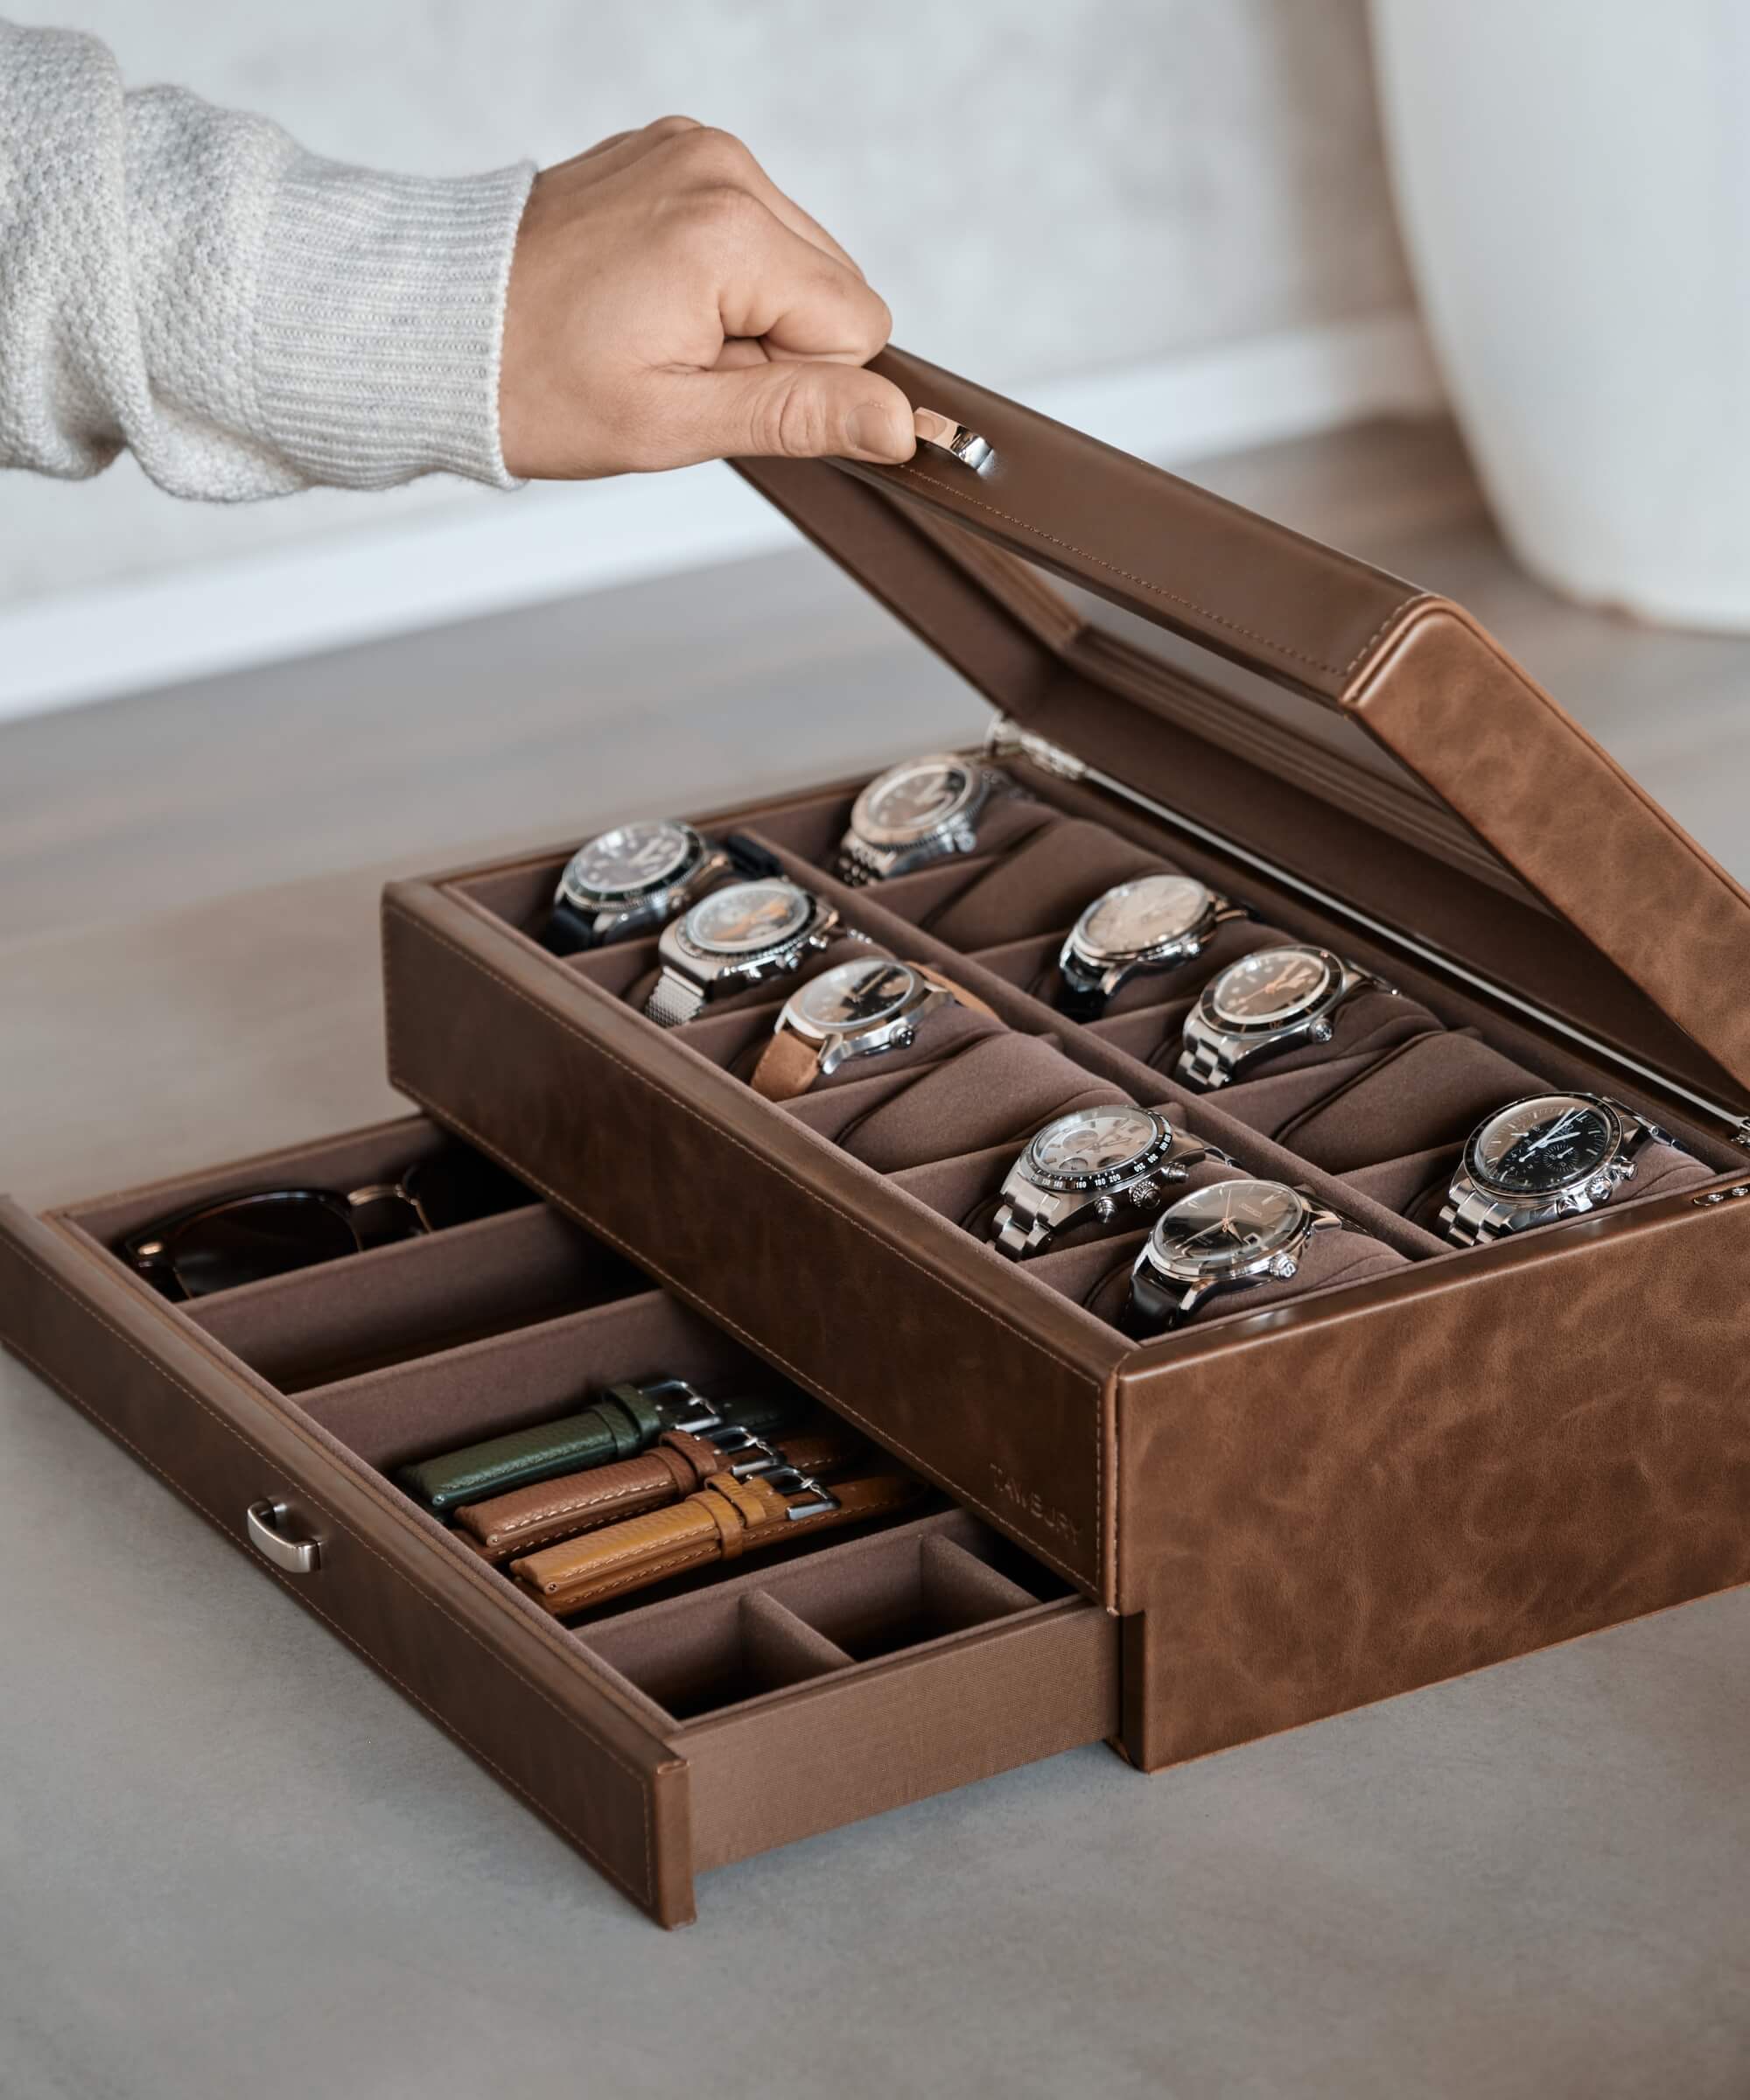 A person displaying a TAWBURY Bayswater 12 Slot Watch Box with Drawer - Brown for storage.